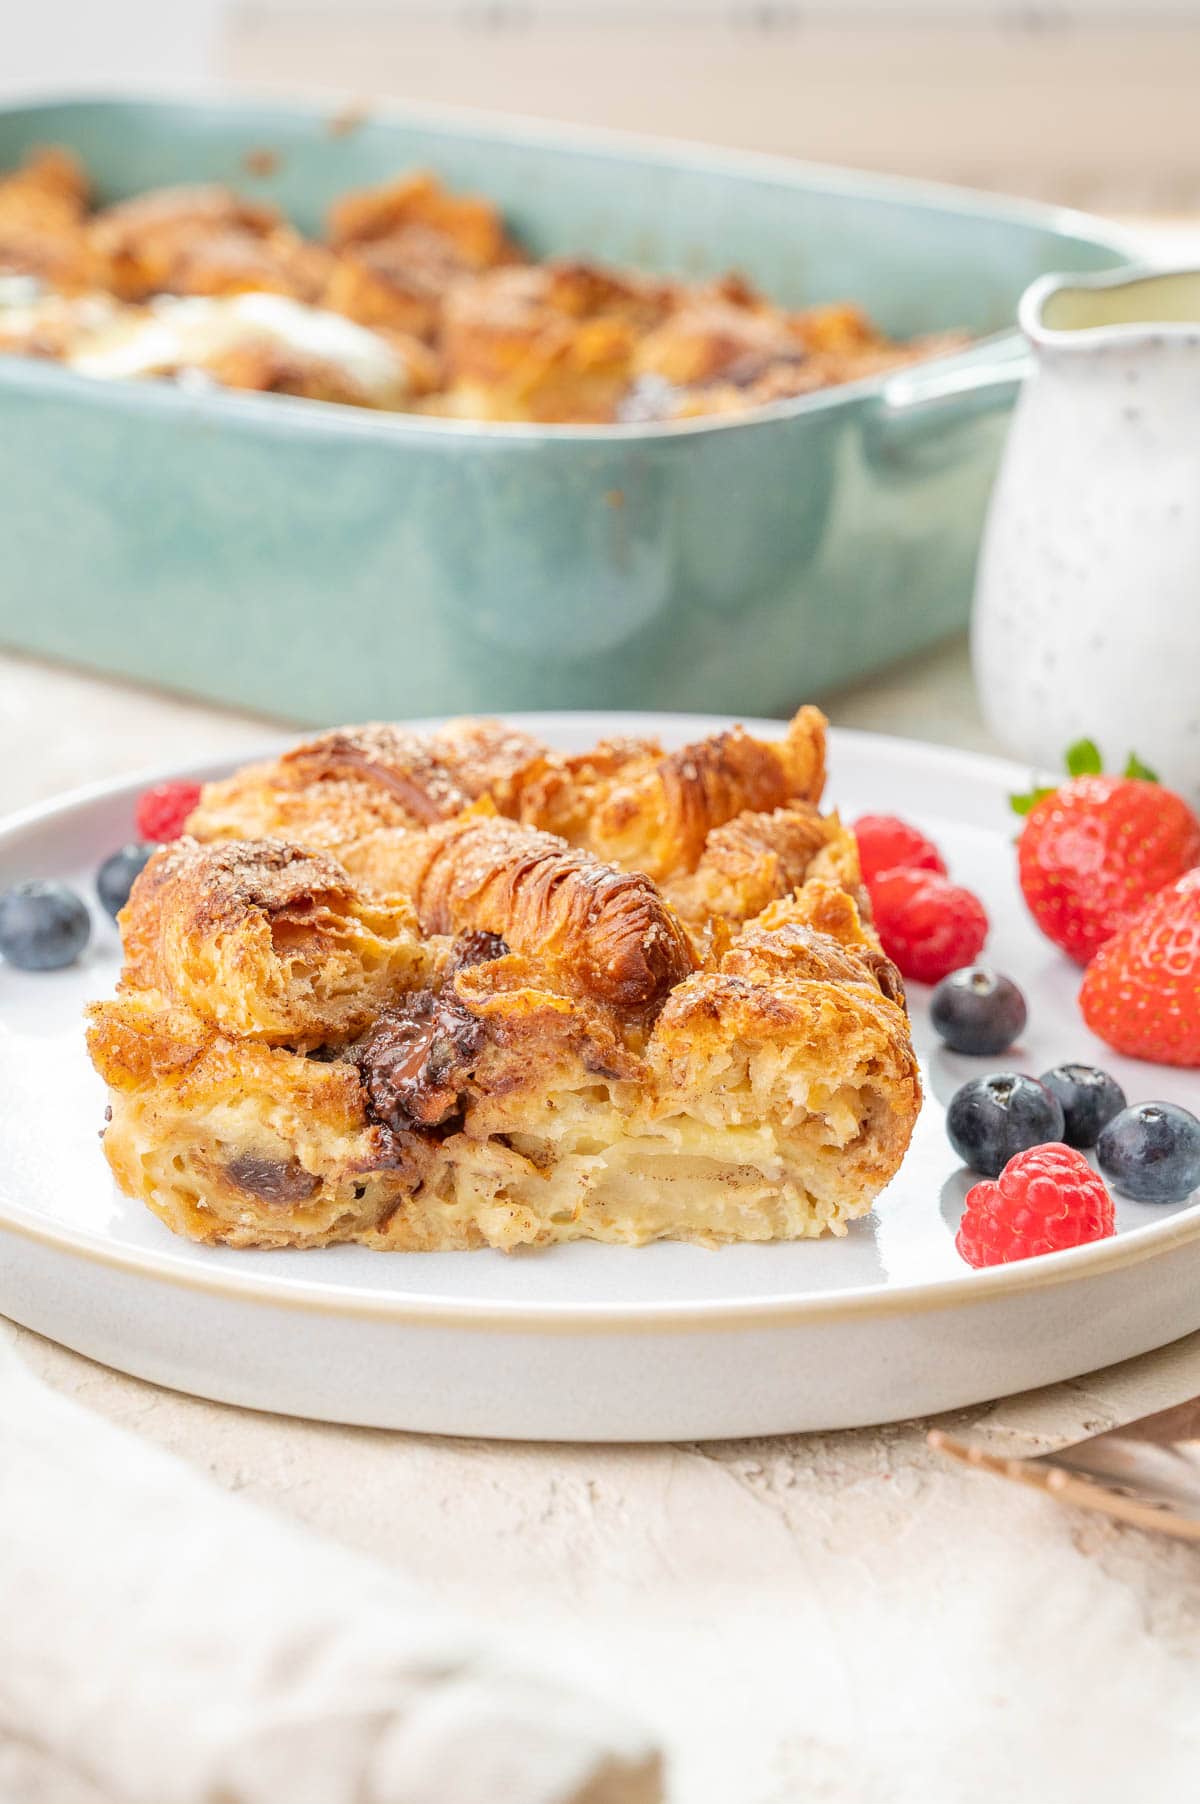 Croissant bread pudding served with berries on a white plate.